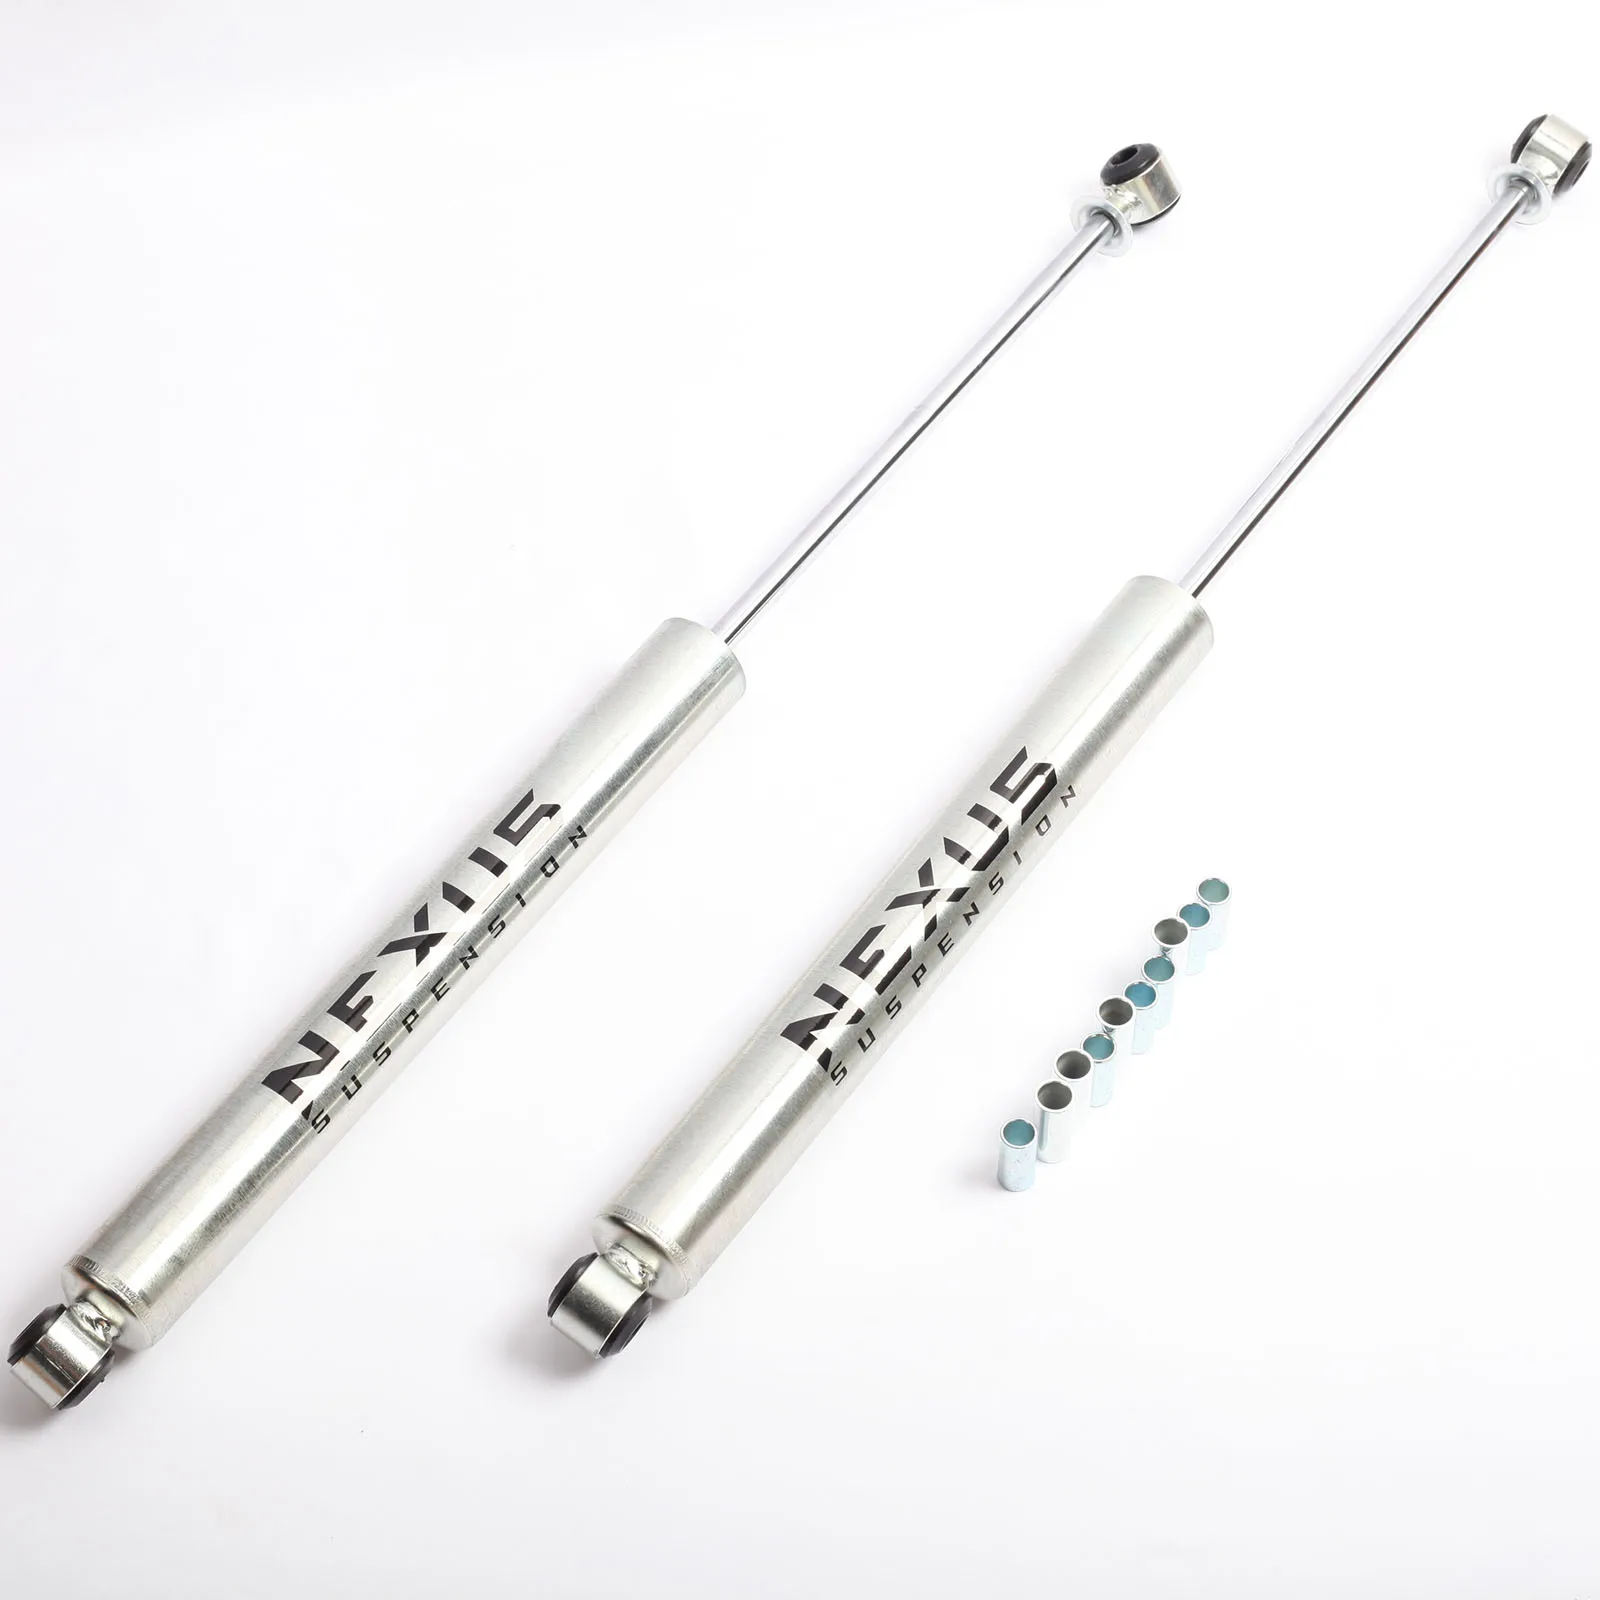 

NEXUS SUSPENSION 6" Lift Rear Shock Absorber for Ford F-250/F-350 1999-2004,Pair Pack Zinc Plated Coating